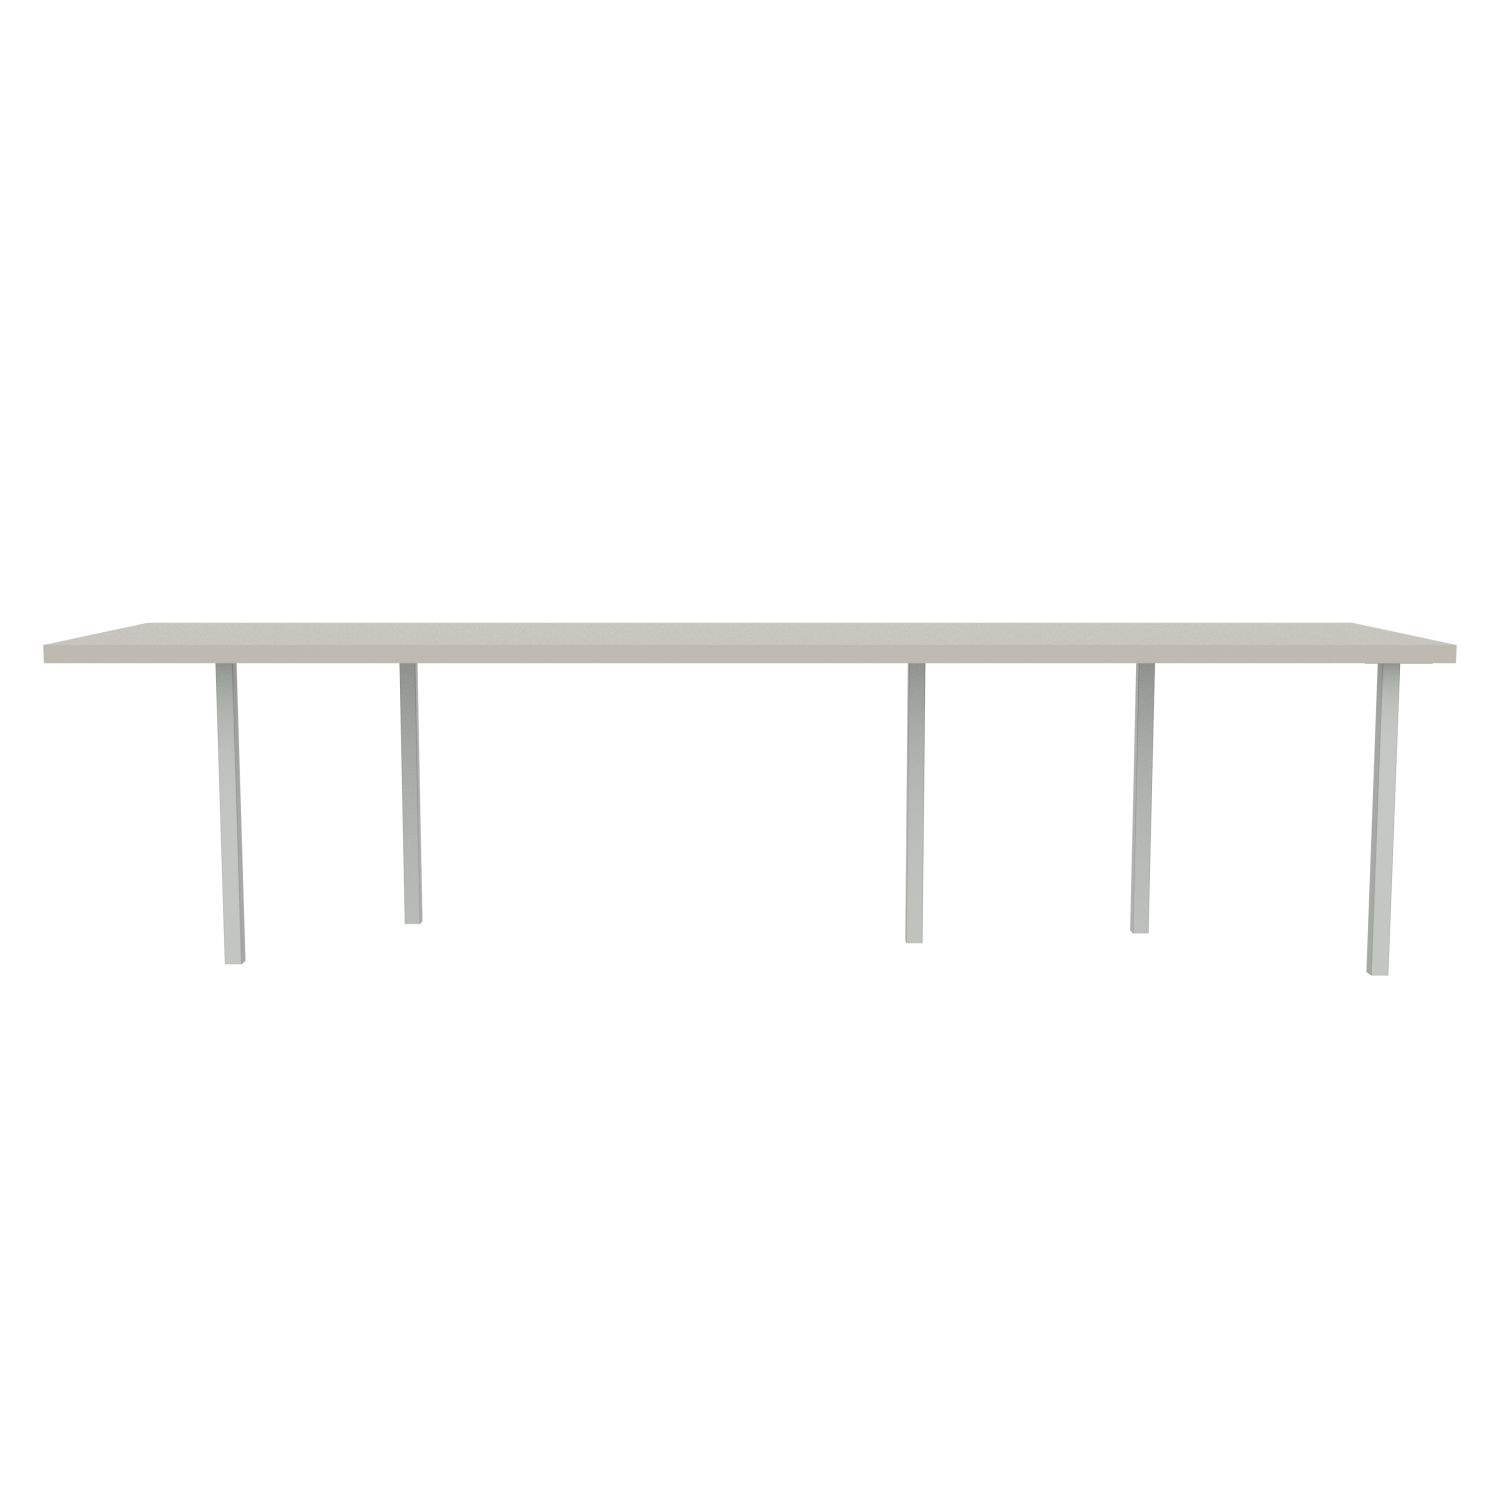 lensvelt bbrand table five fixed heigt 80x310 hpl white 50 mm price level 1 light grey ral7035